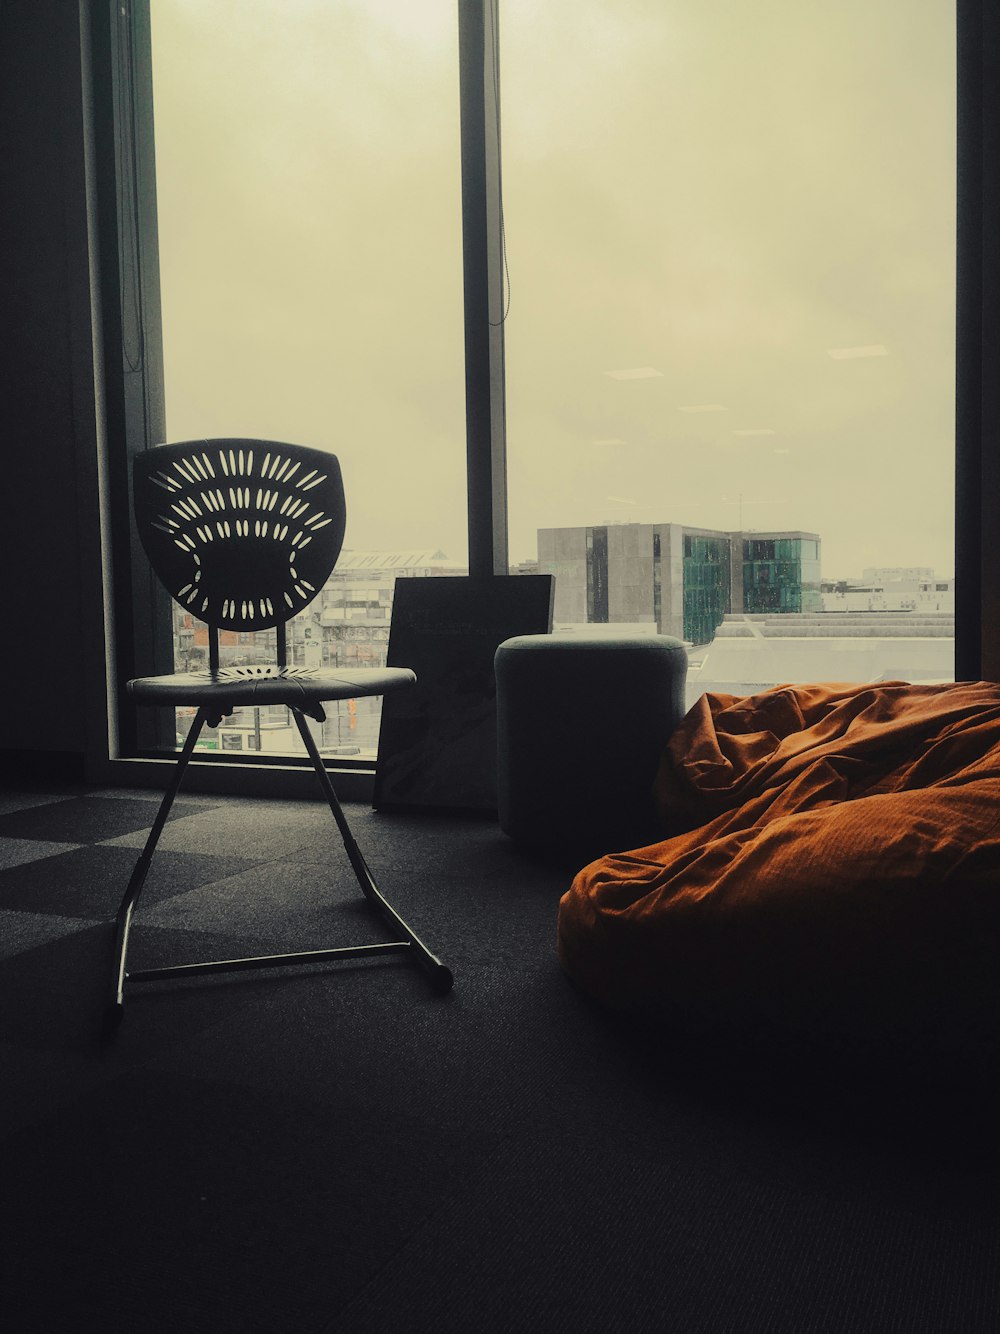 a chair sitting in front of a window next to a bed